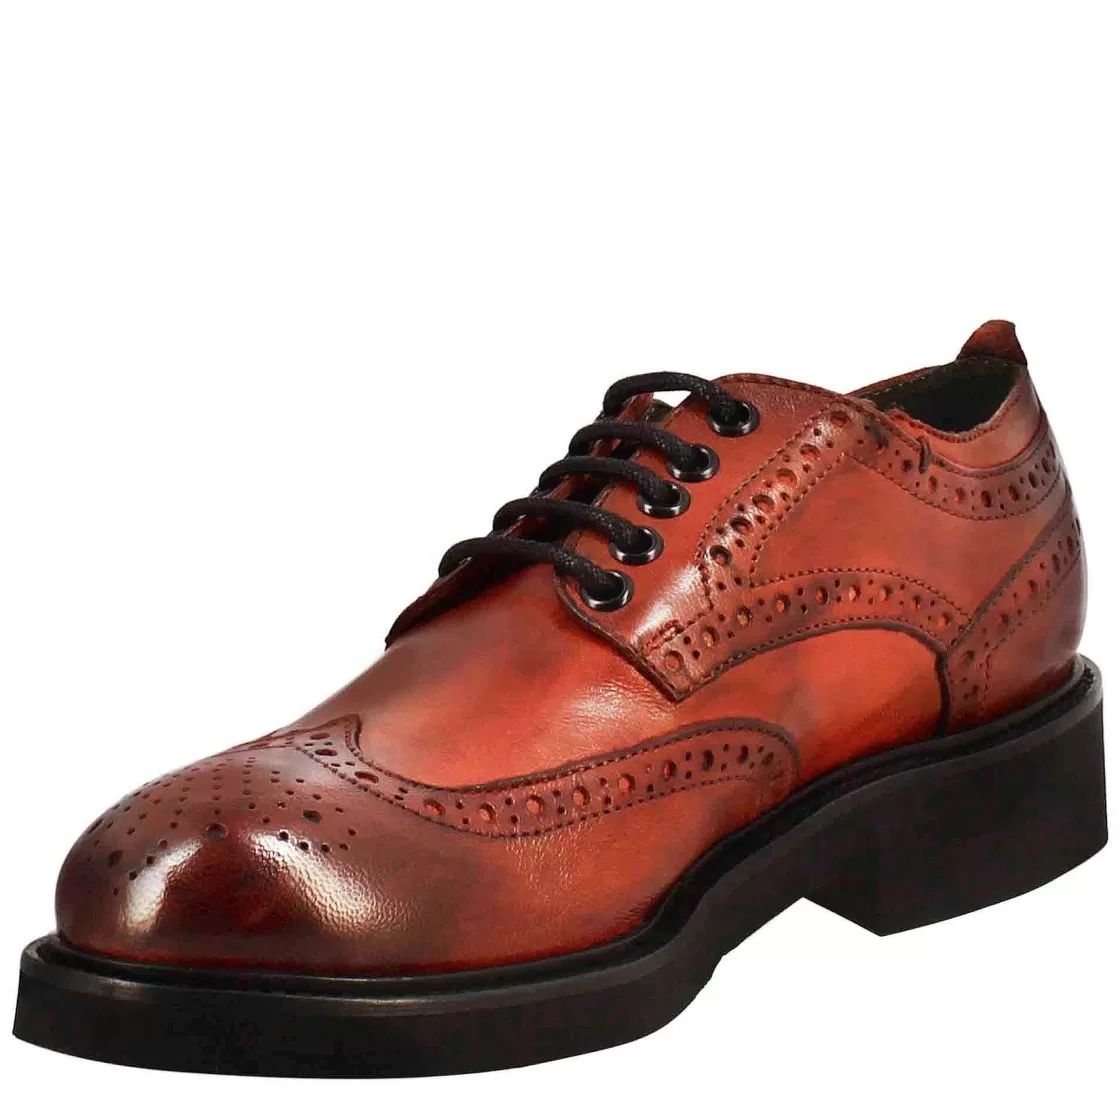 Leonardo Women'S Derby With Paupa Brogue Details In Red Washed Leather Cheap